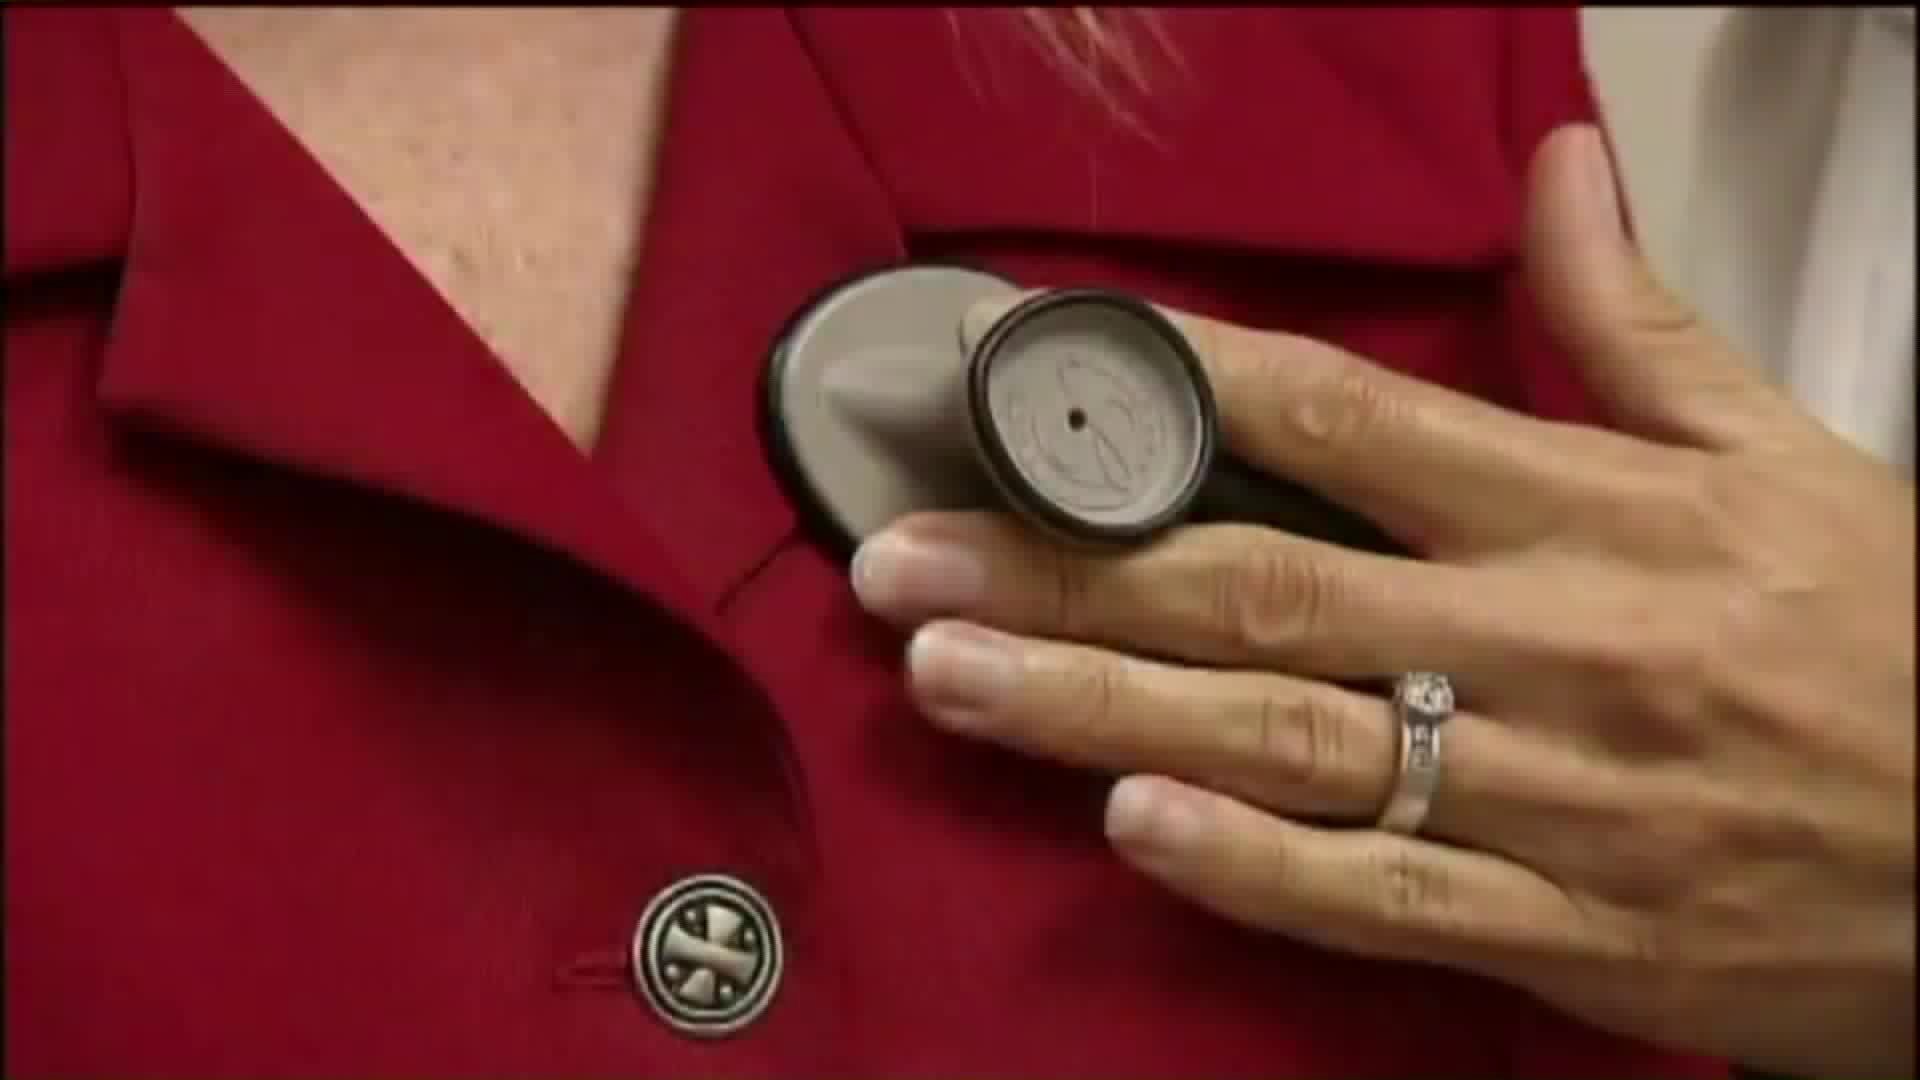 Low income families speak against proposed healthcare cuts